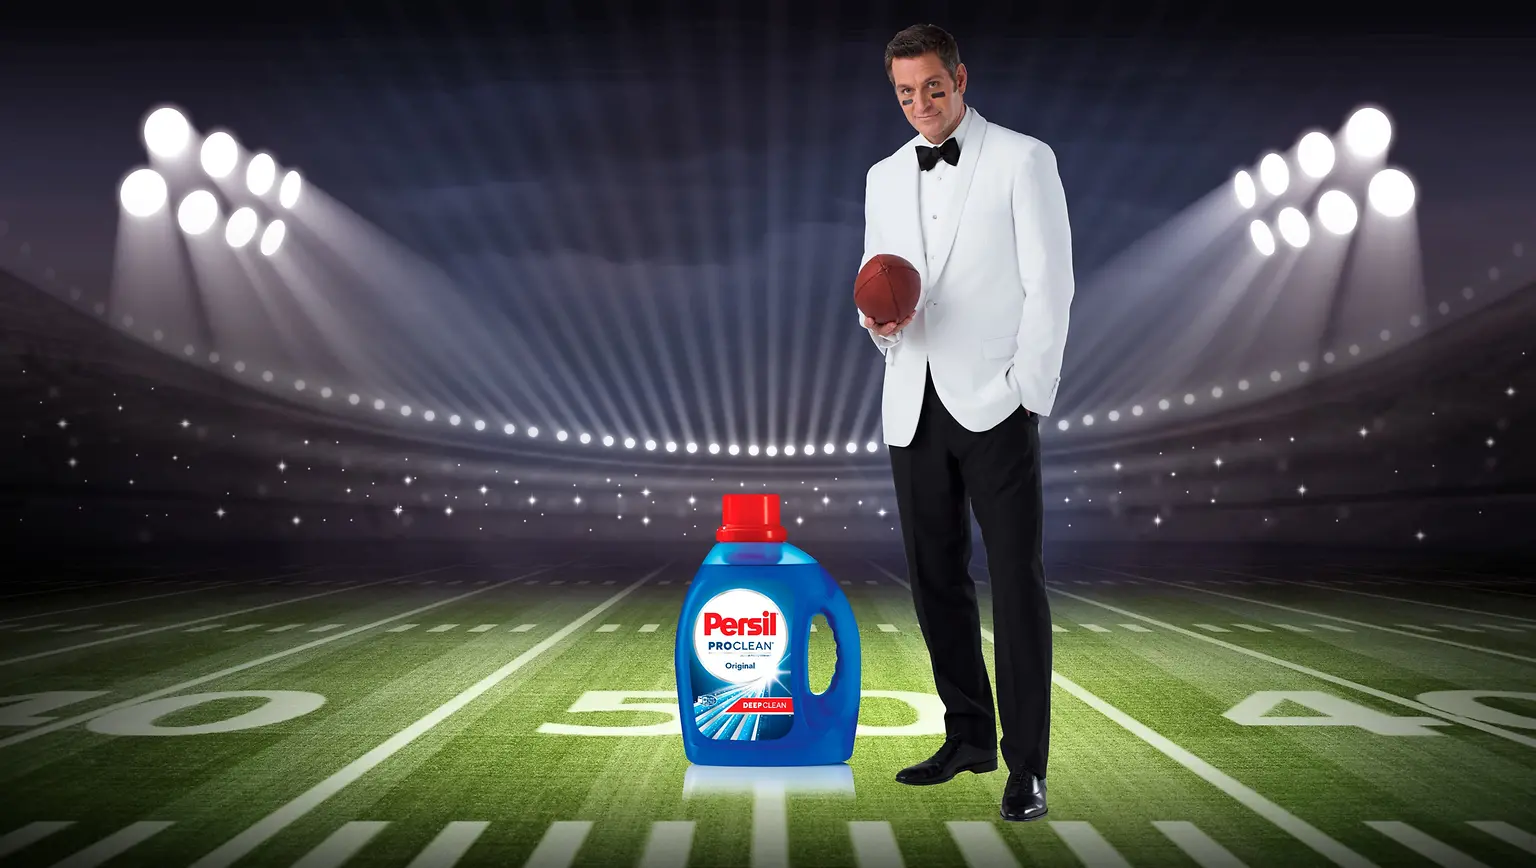 
The Persil Brand’s Super Bowl commercial saw the return of Peter Hermann as “The Professional” and showcased the exceptional deep-cleaning power of Persil ProClean.